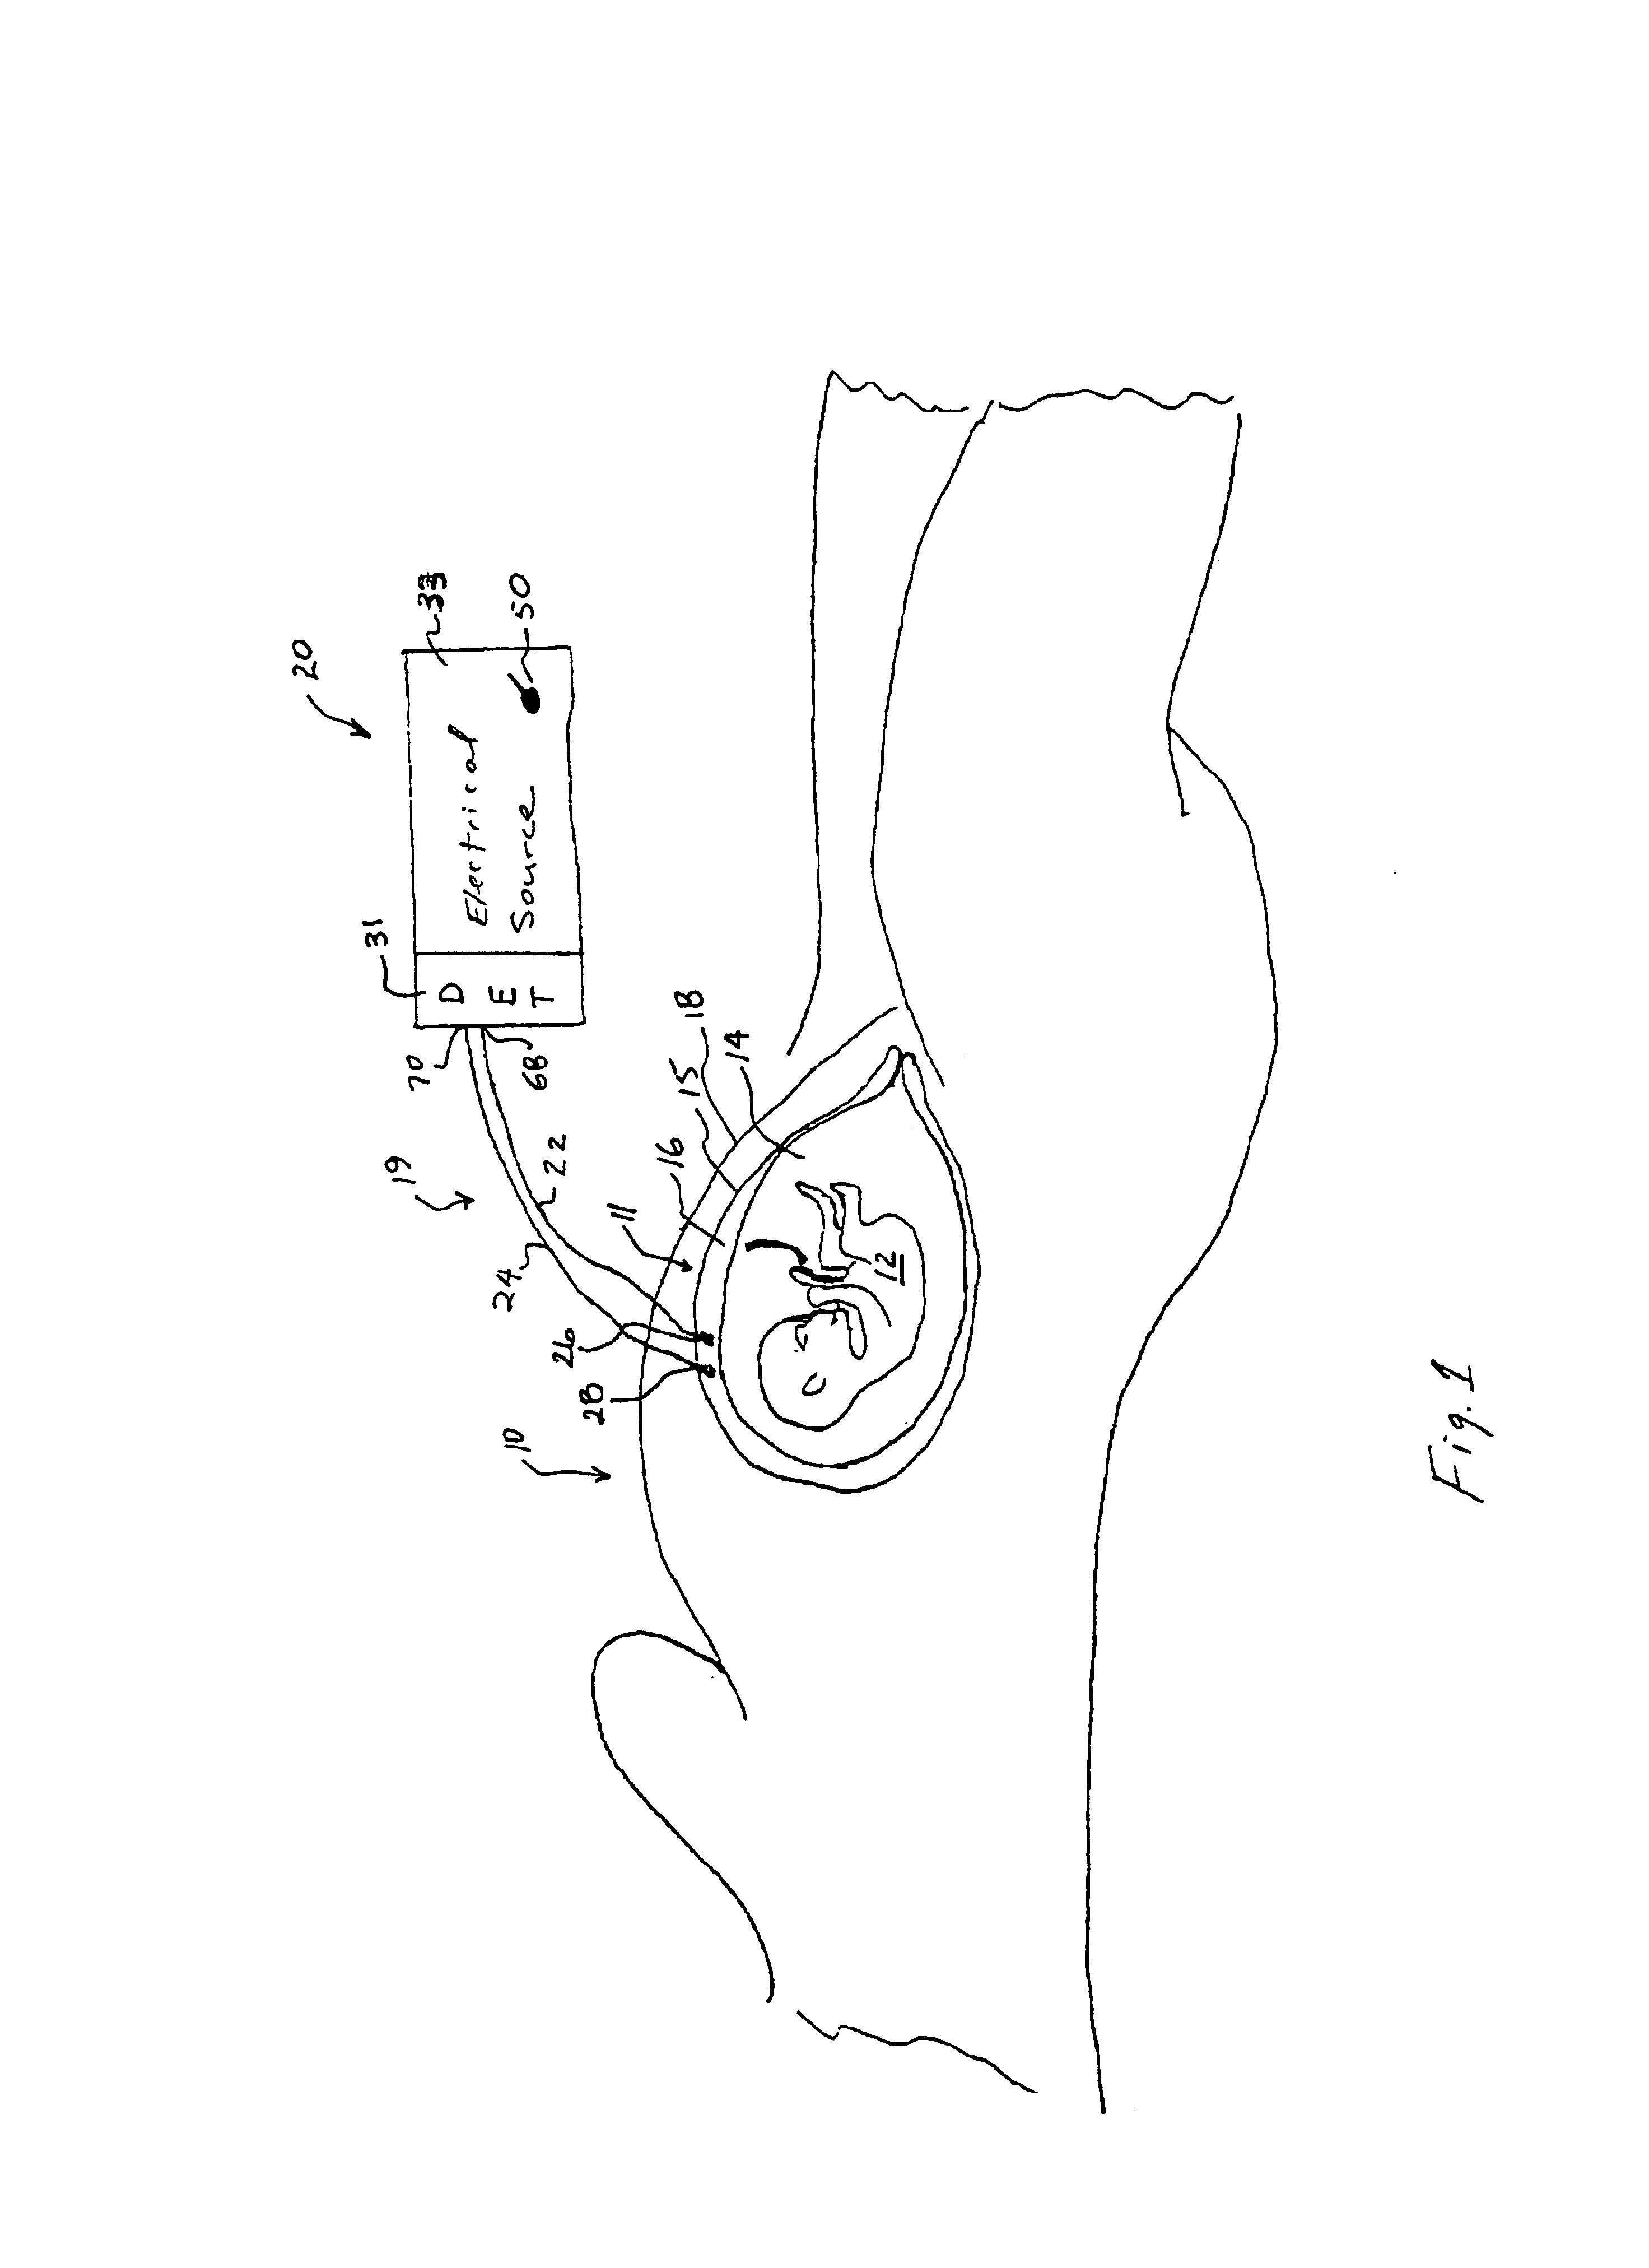 Uterine contraction detection and initiation system and method